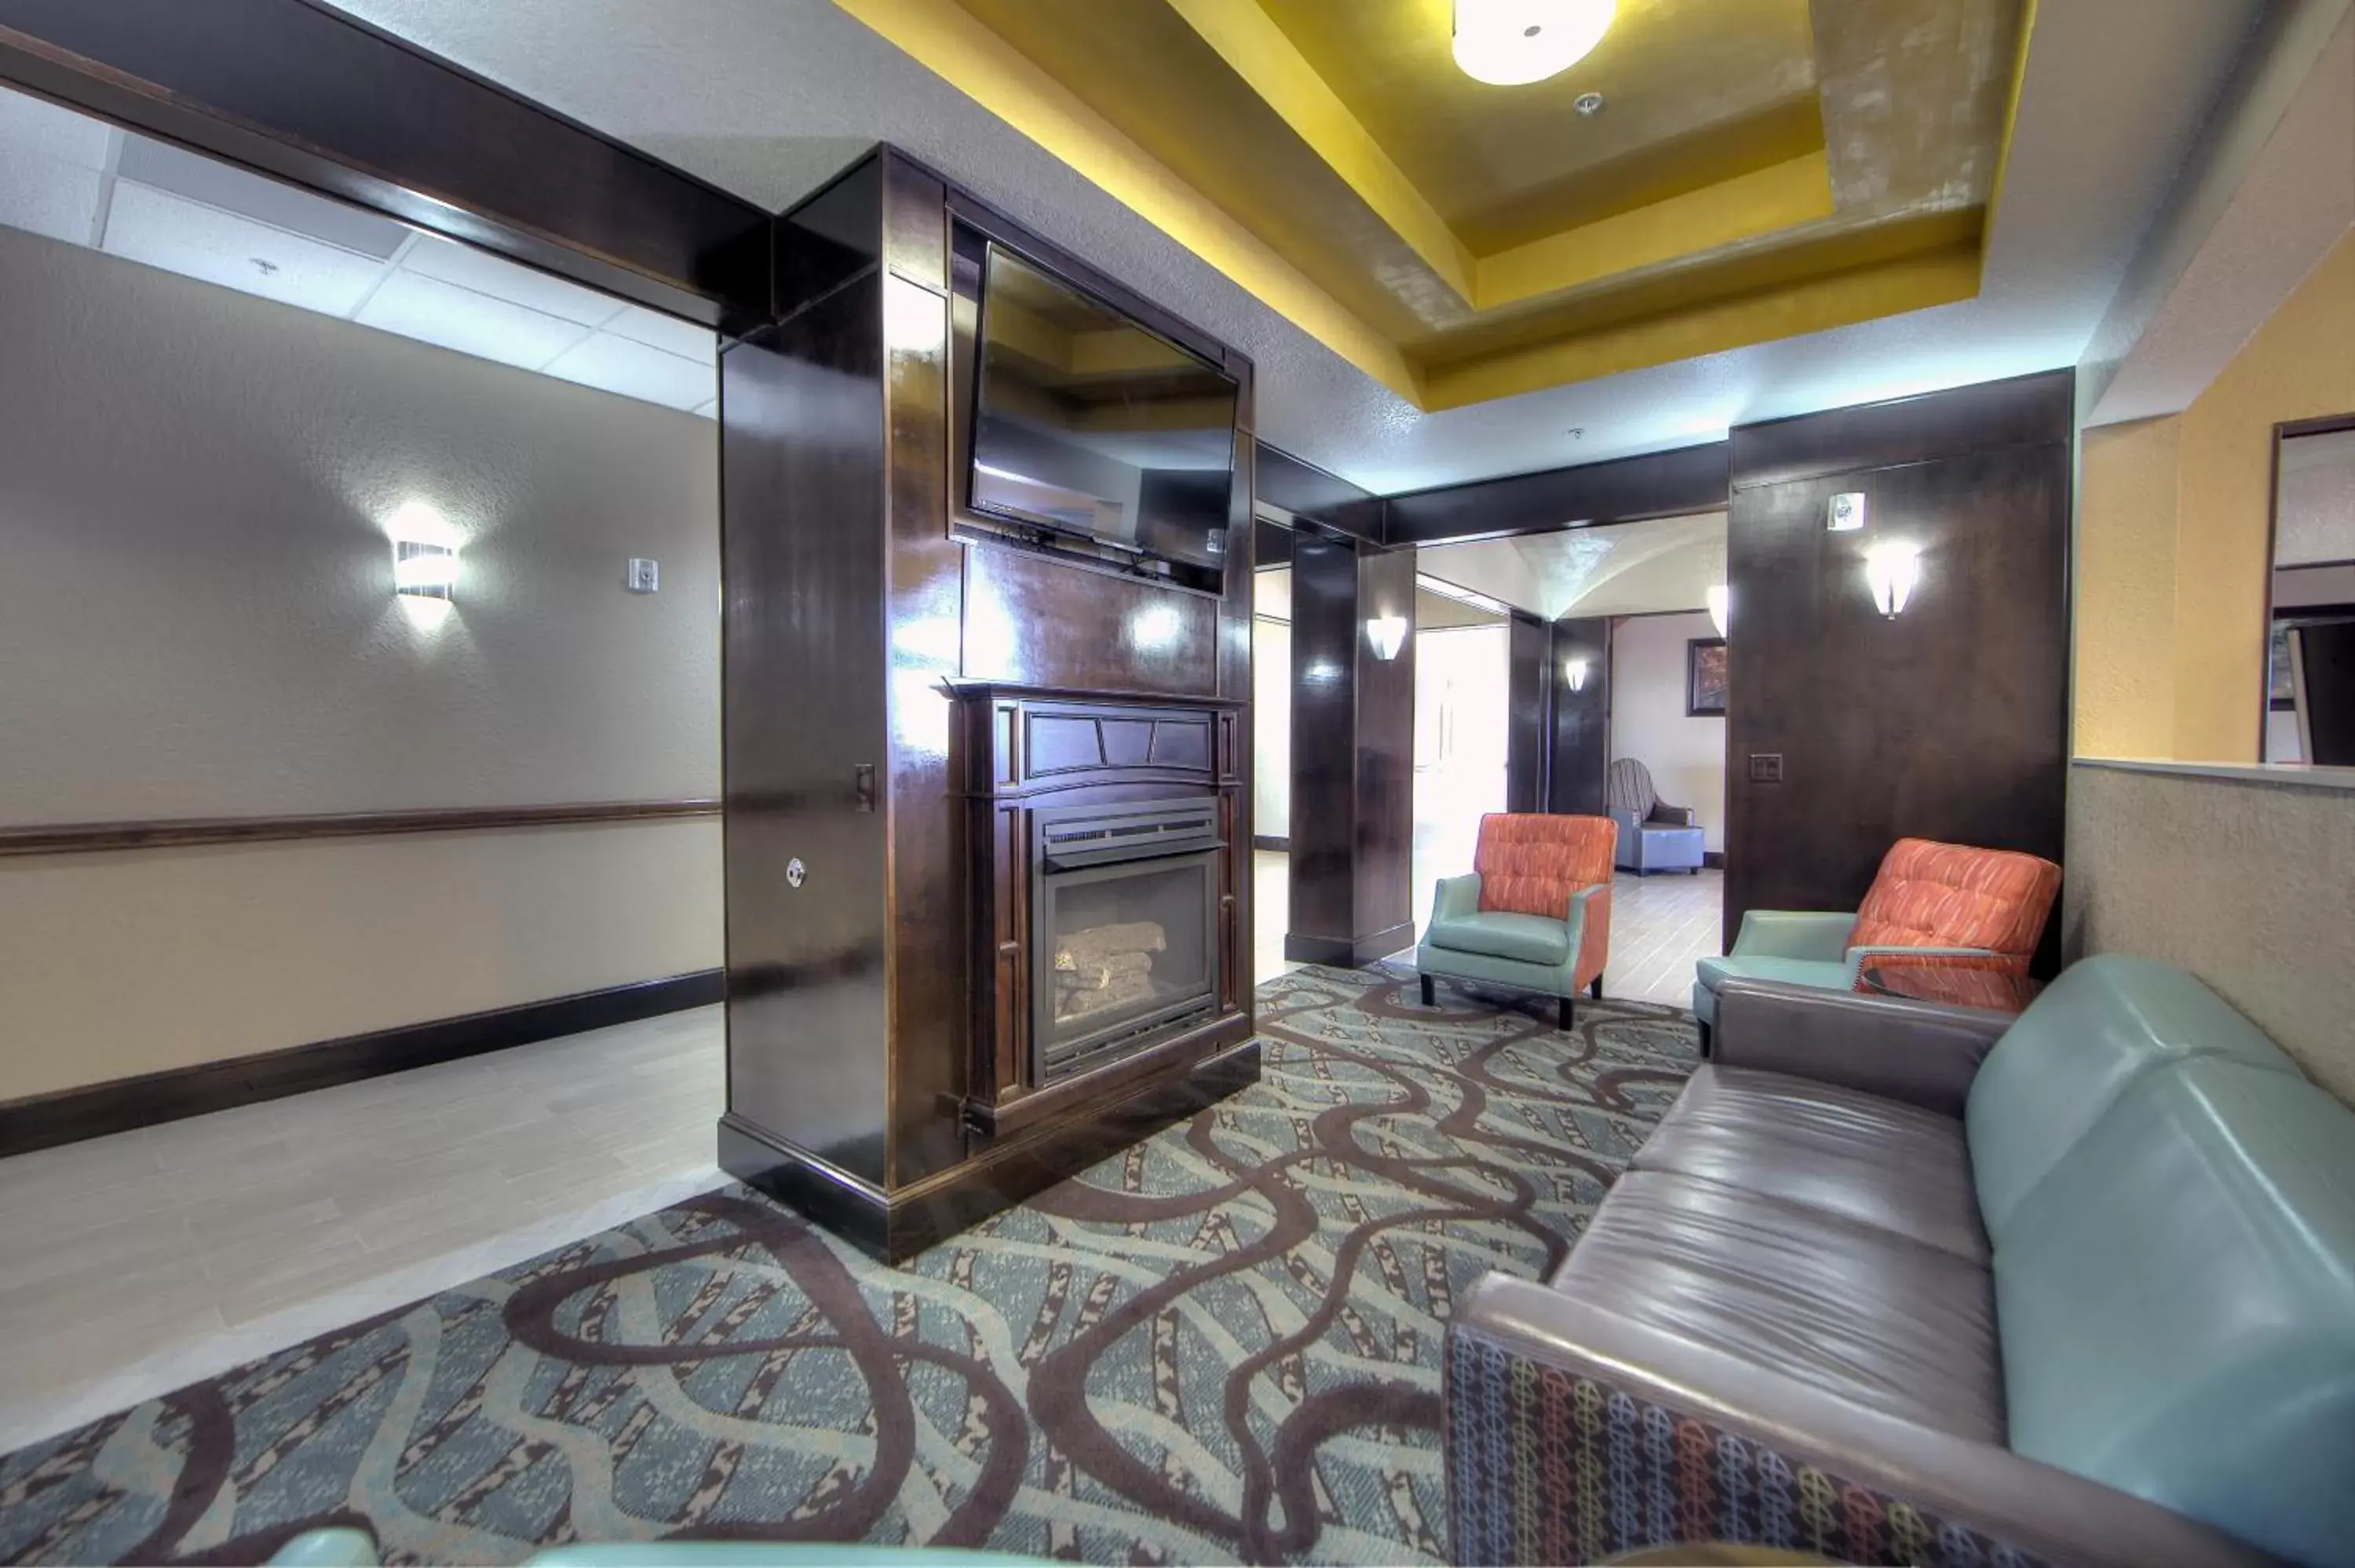 TV and multimedia, Lobby/Reception in Comfort Inn & Suites, White Settlement-Fort Worth West, TX